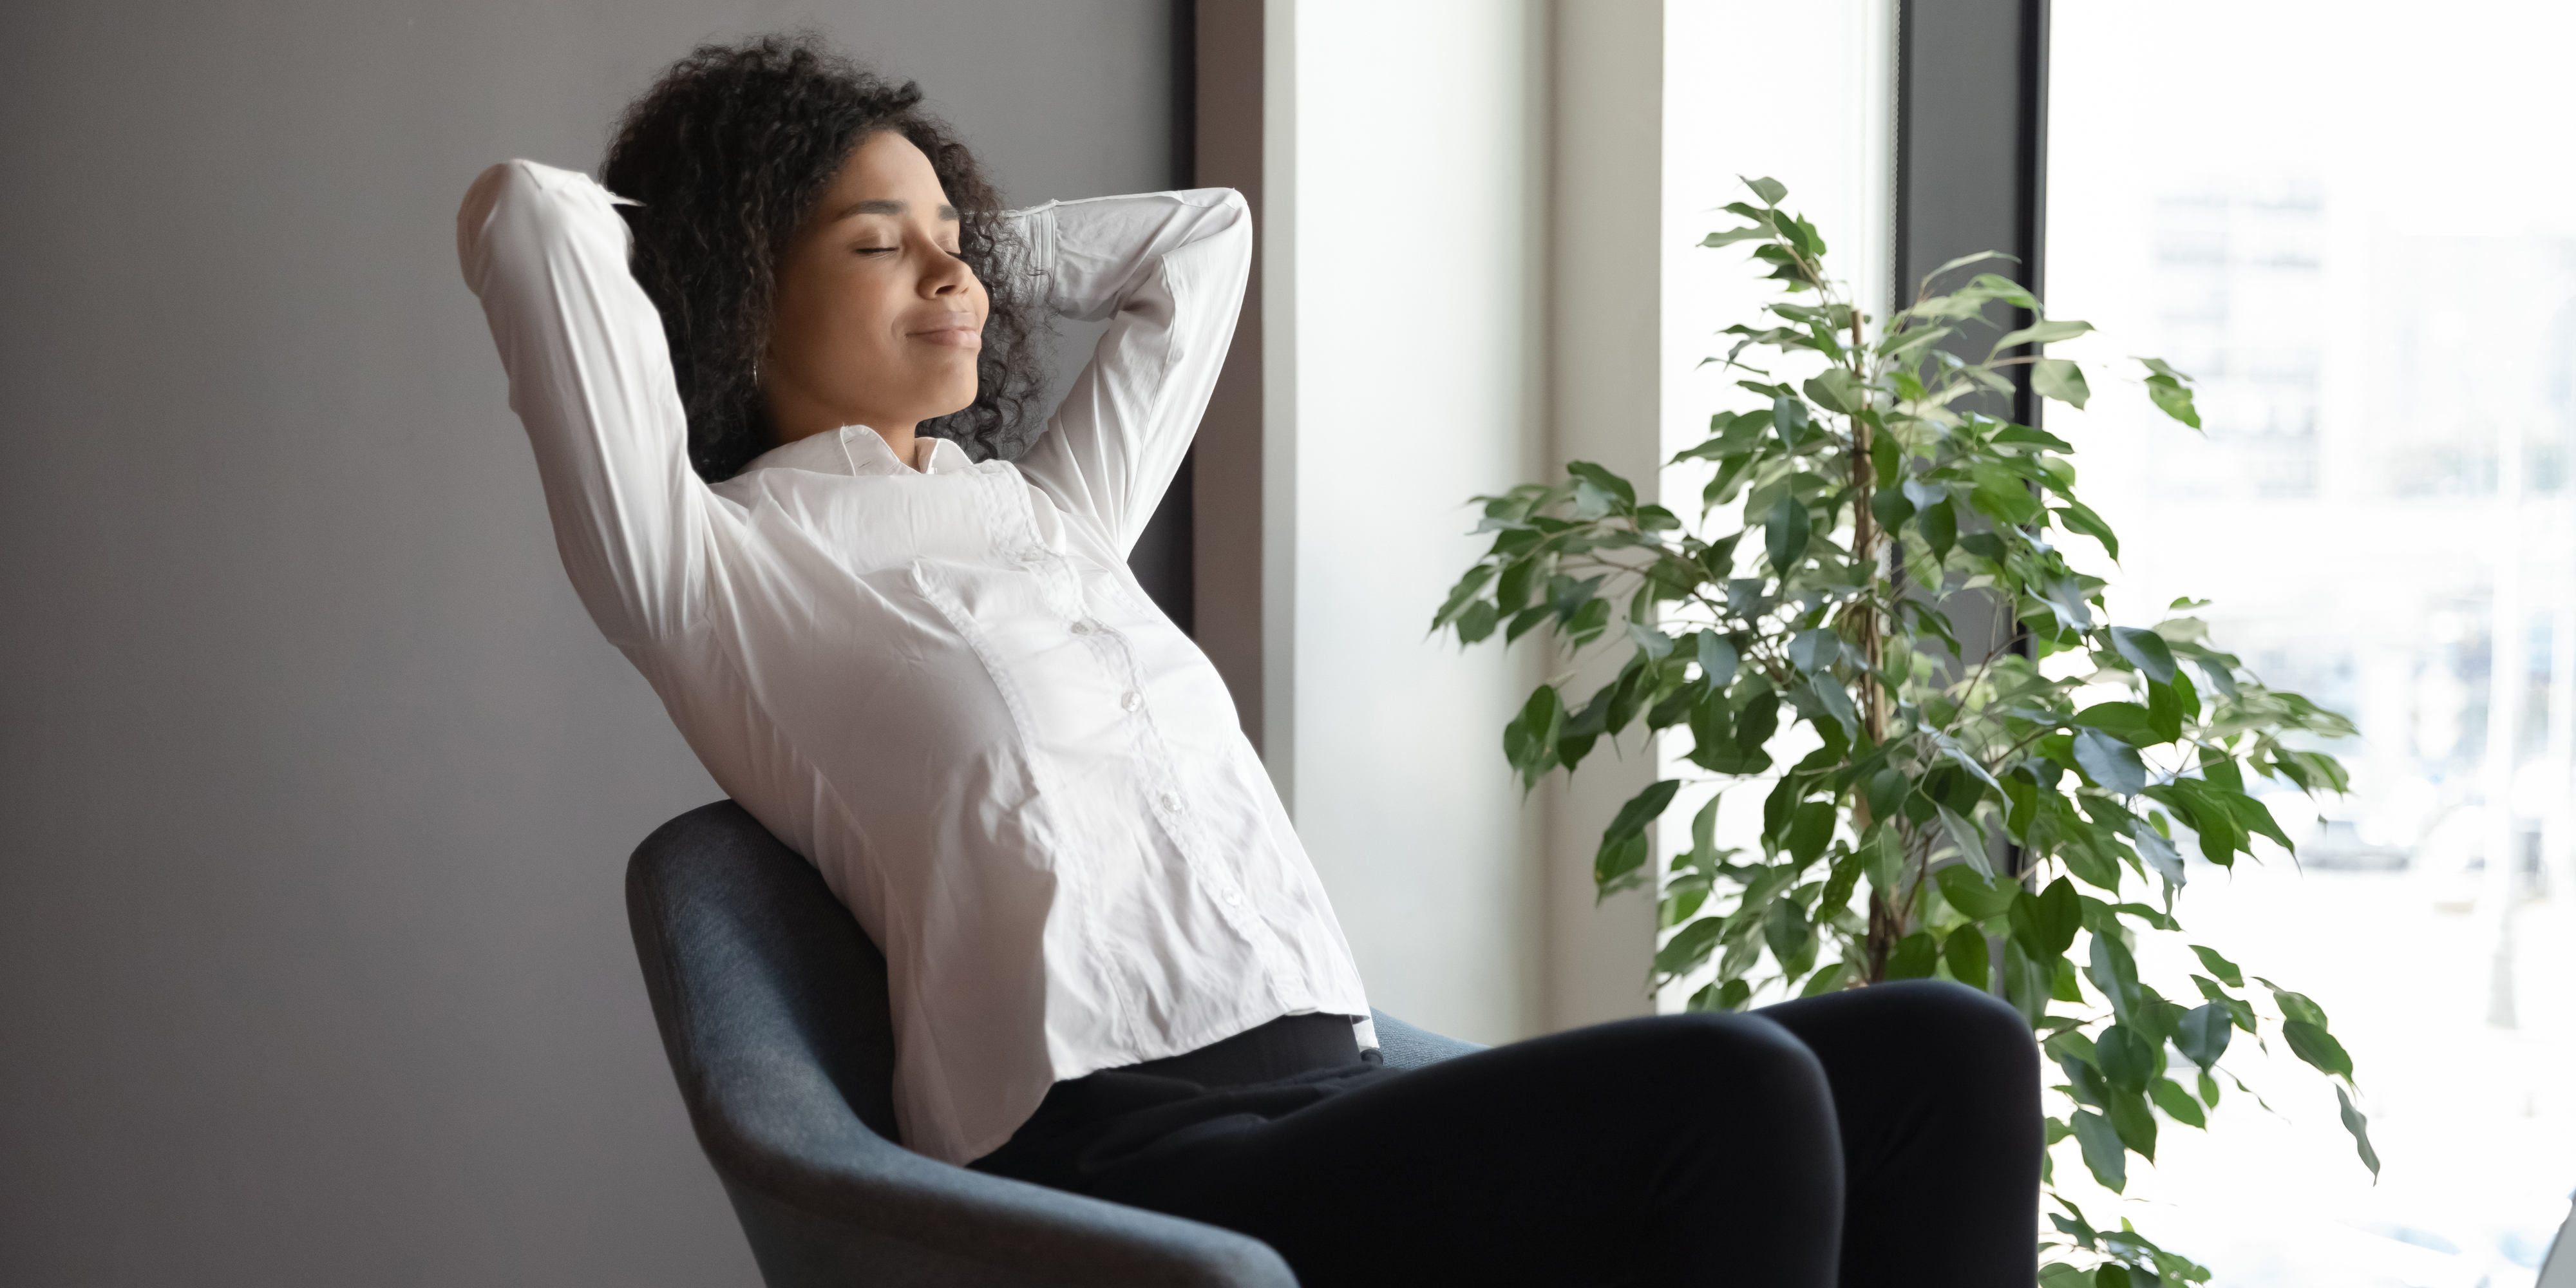 Meditations You Can Do At Work